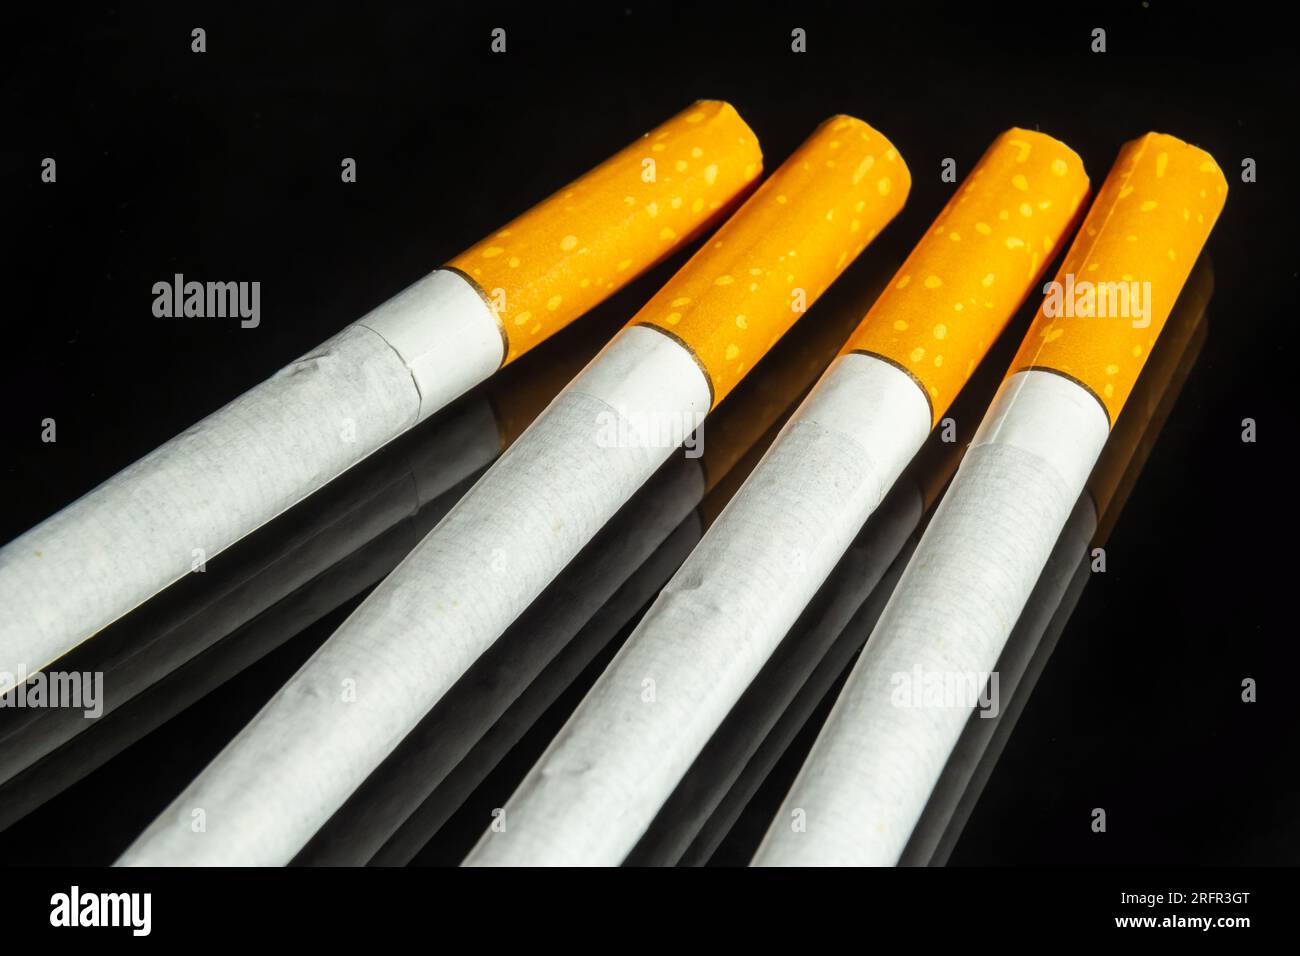 some white and brown cigarettes, cigarettes allowed only for over eighteen, black background. Stock Photo